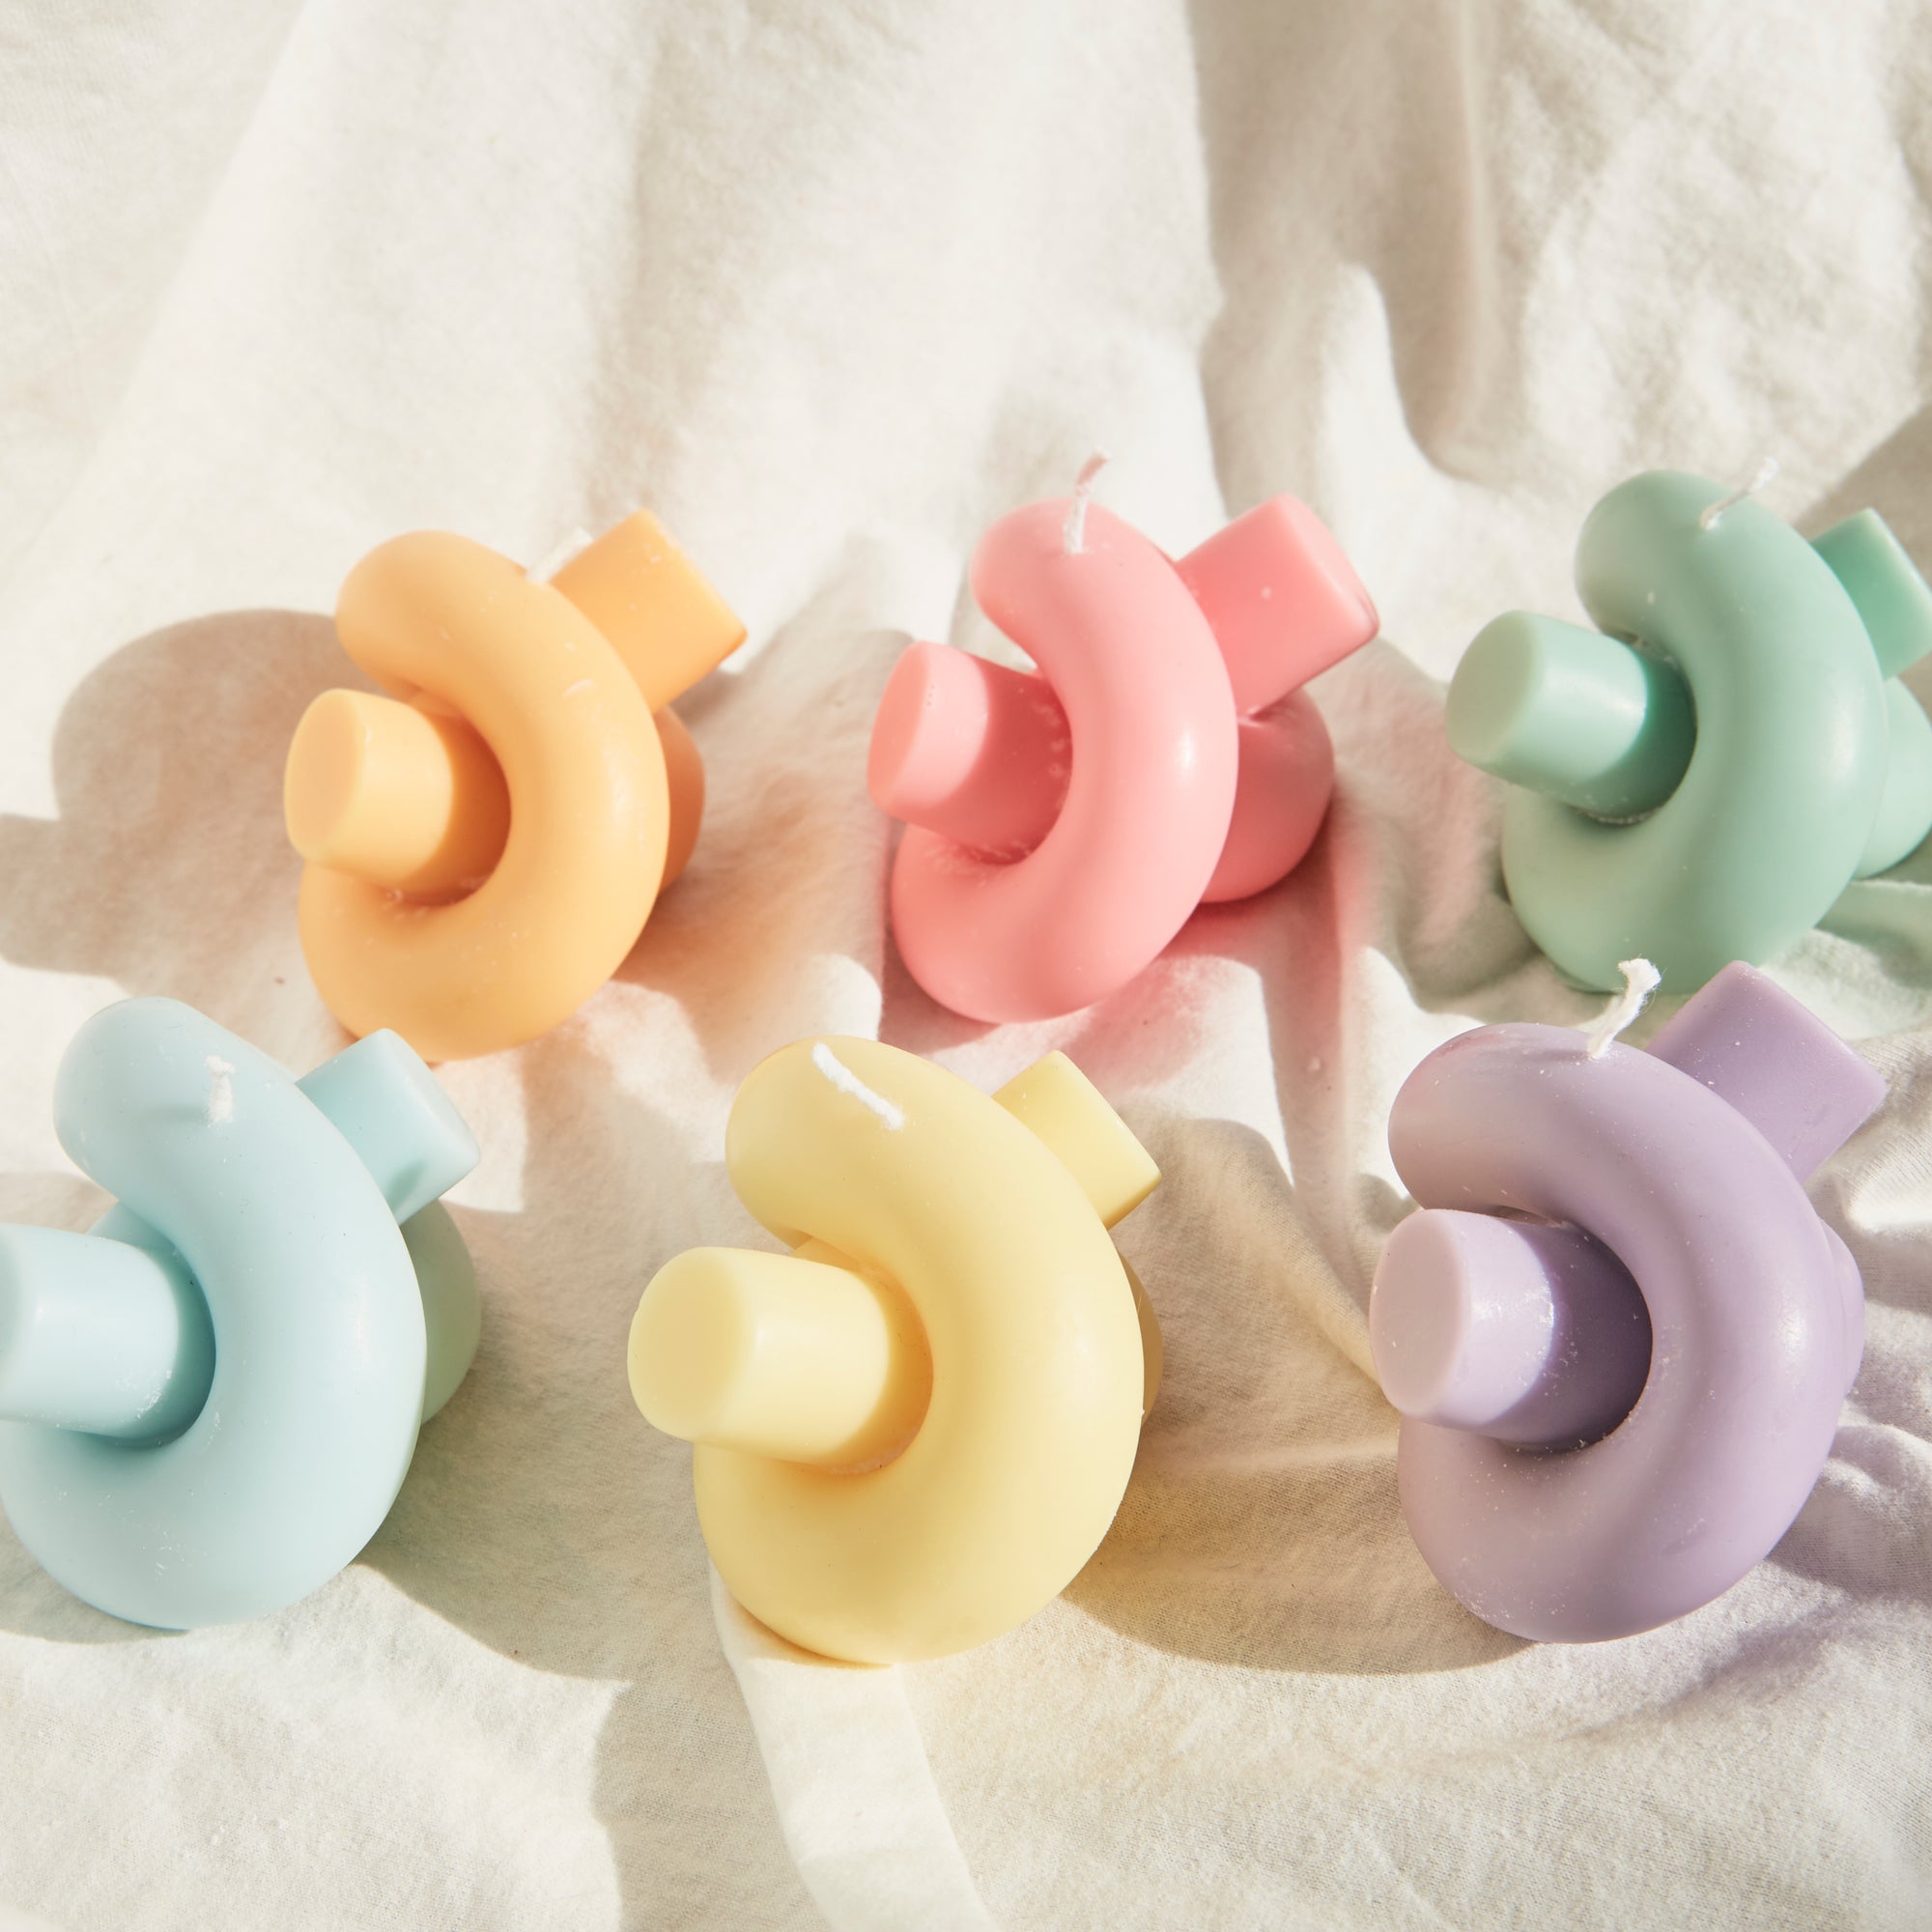 【Ready to ship】Knot Shaped Soy & BeesWax Candle │ Kawaii Candle